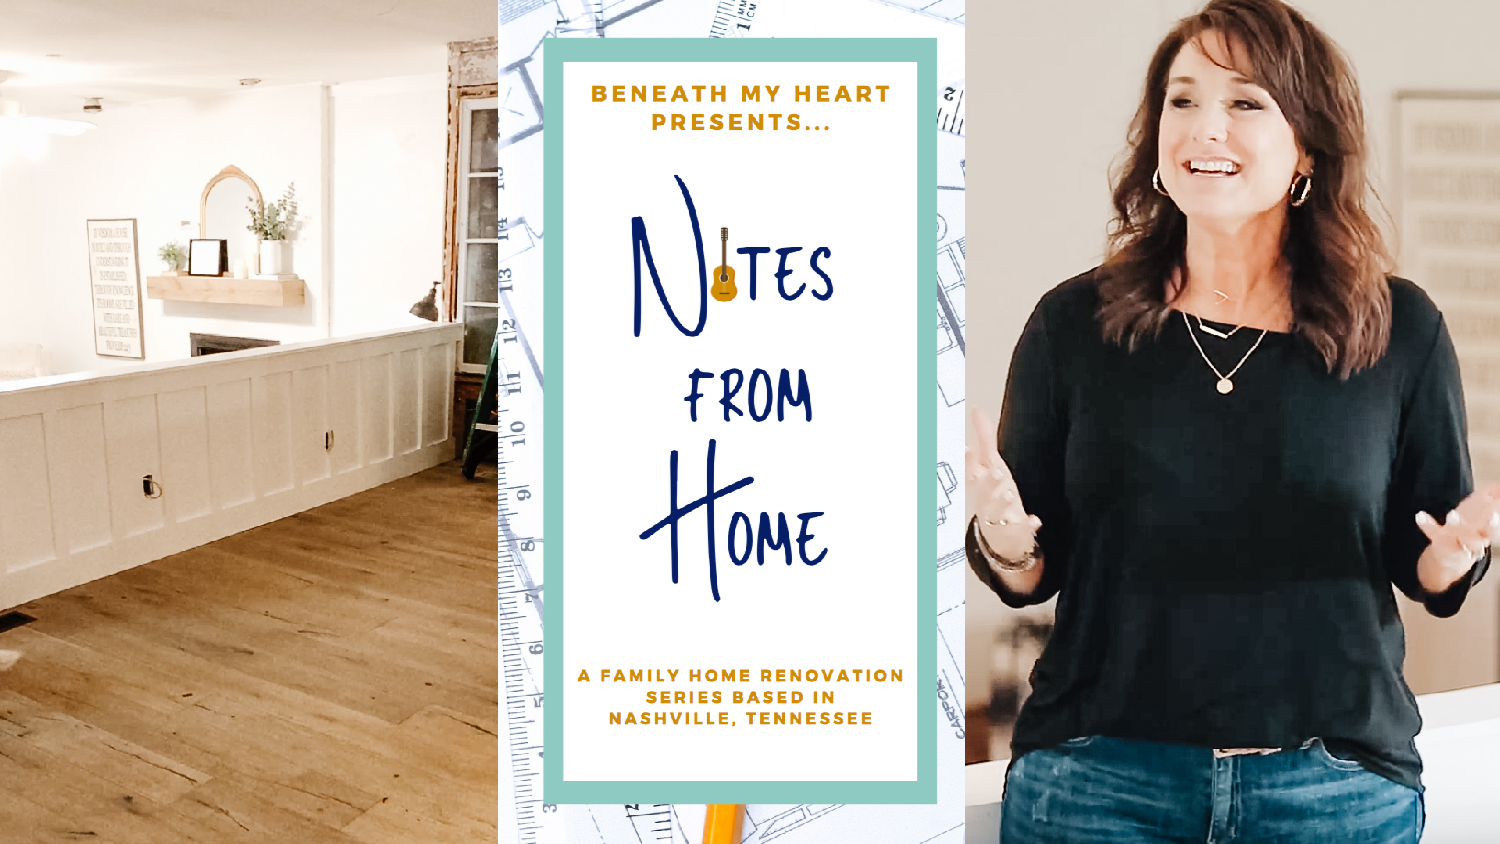 NOTES FROM HOME (Season 2, Episode 4)